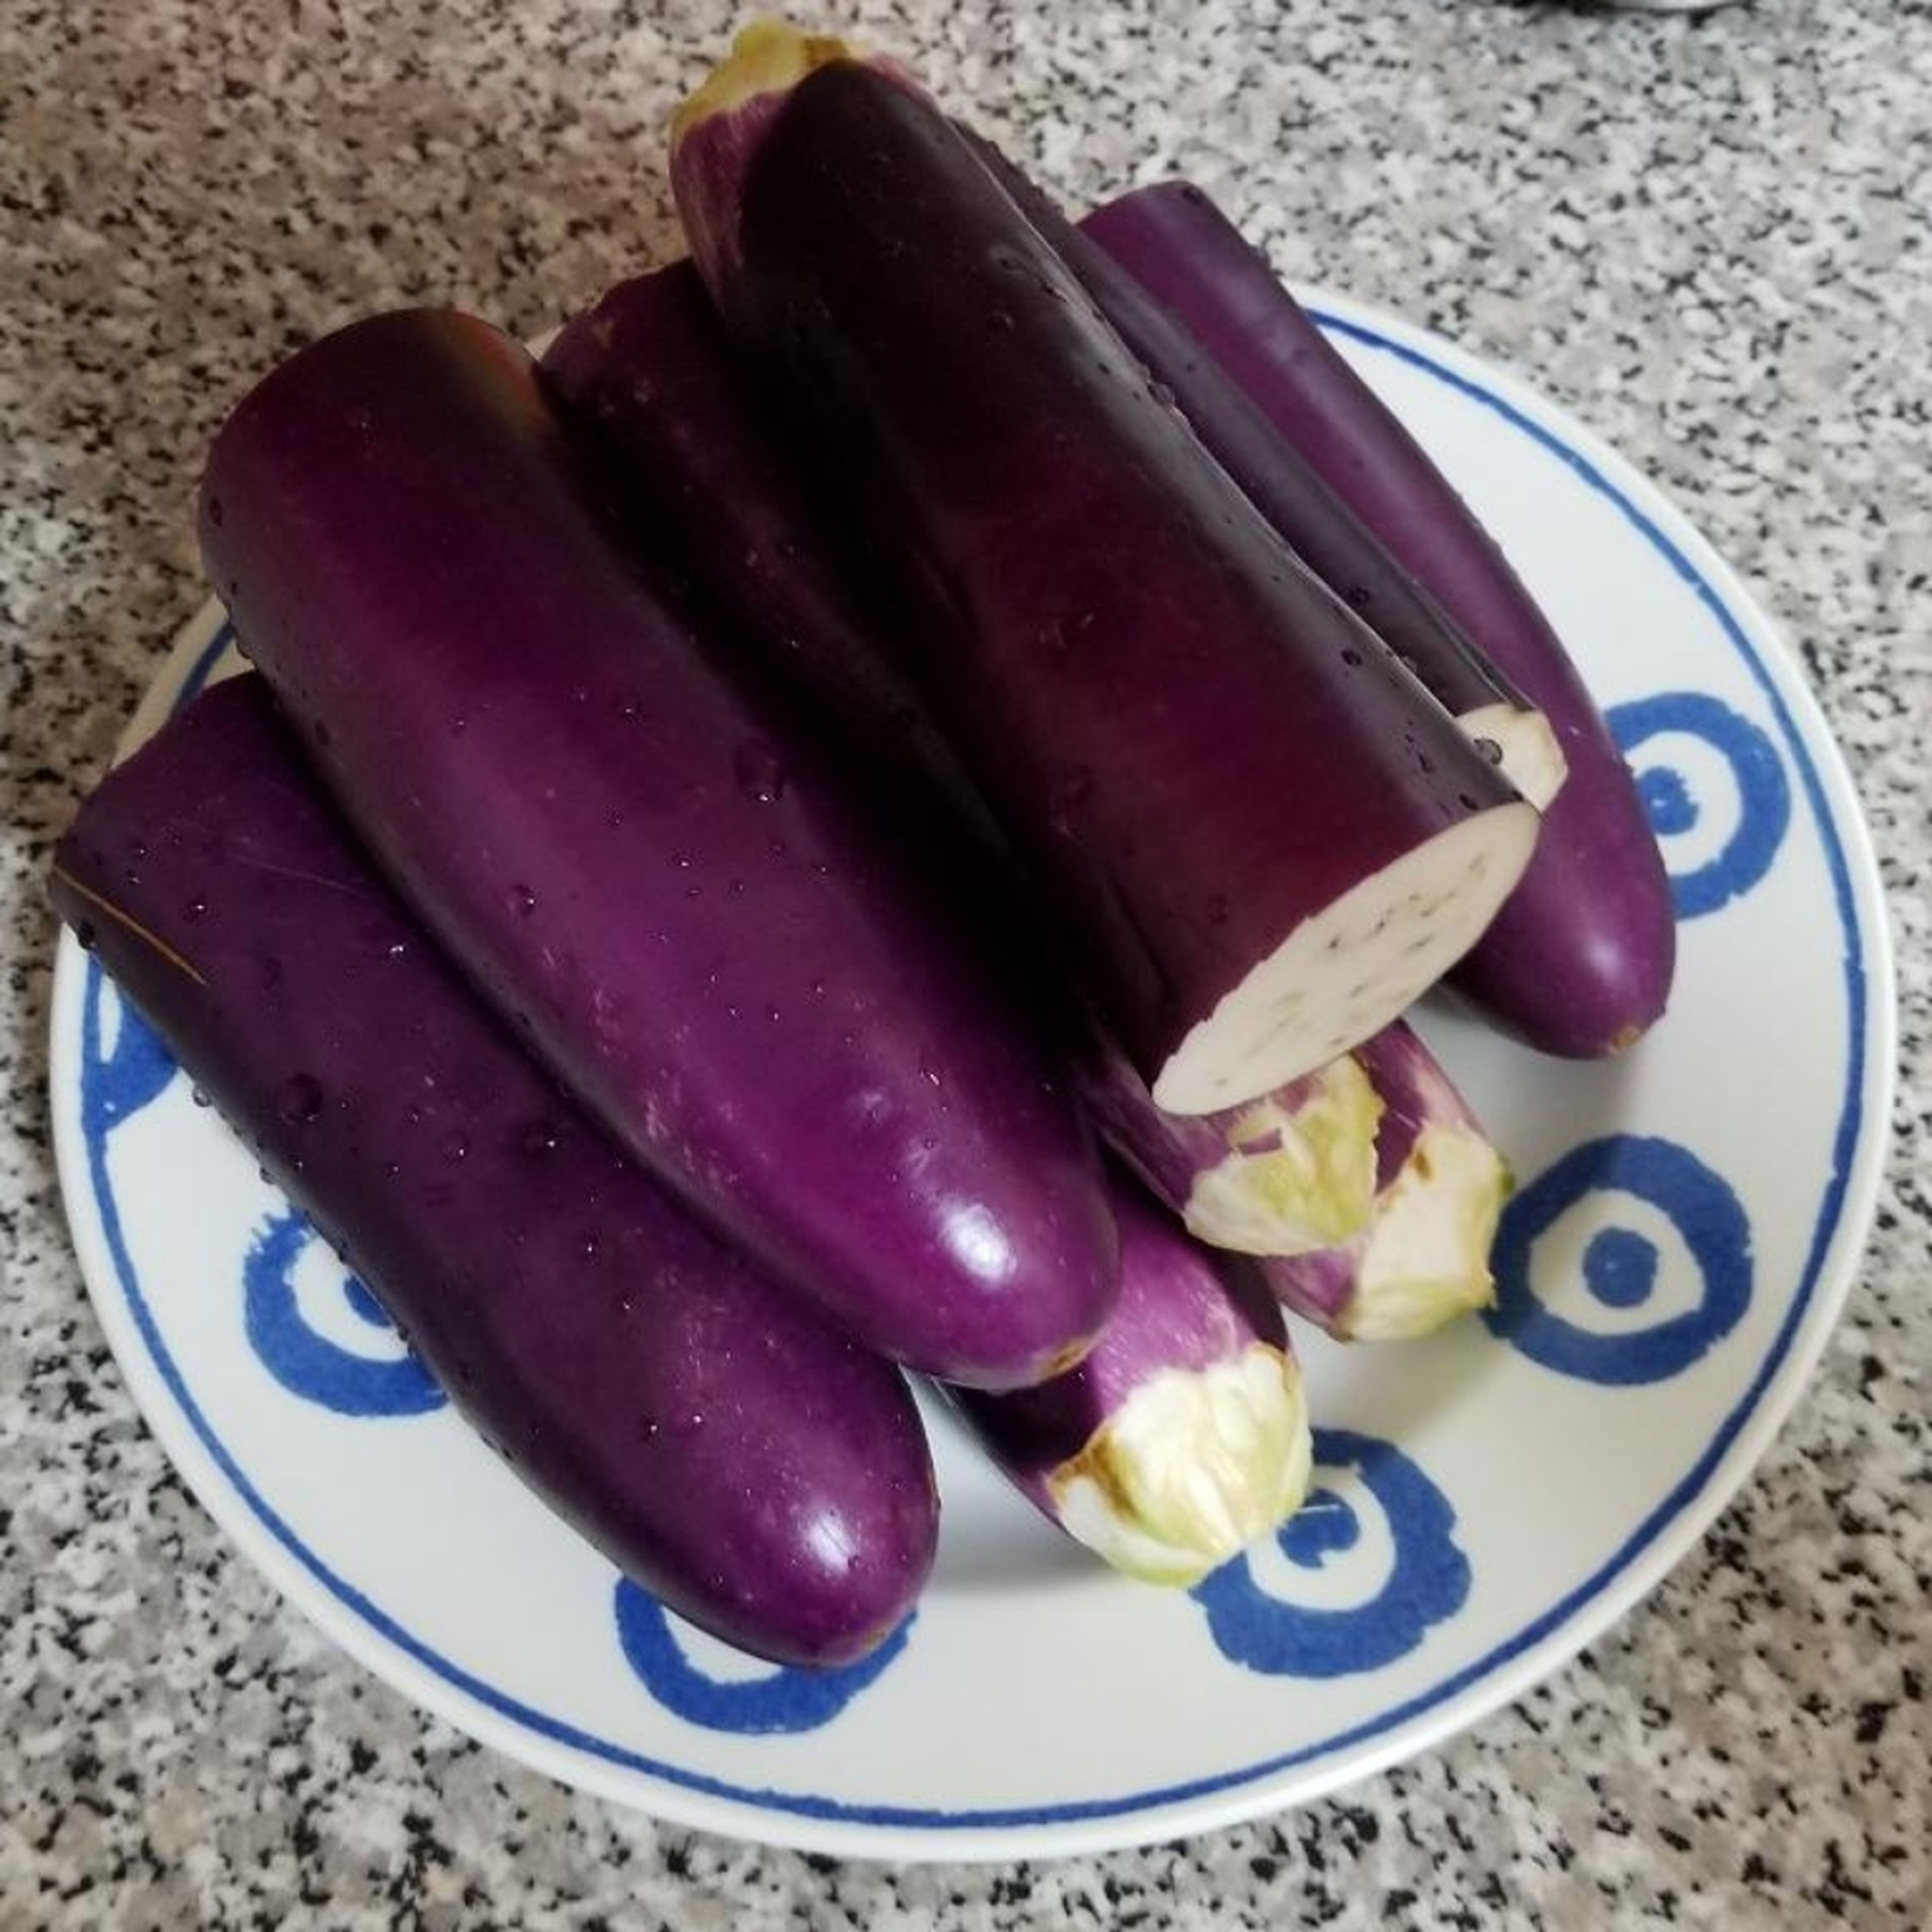 Thoroughly wash and cut the eggplants in half.